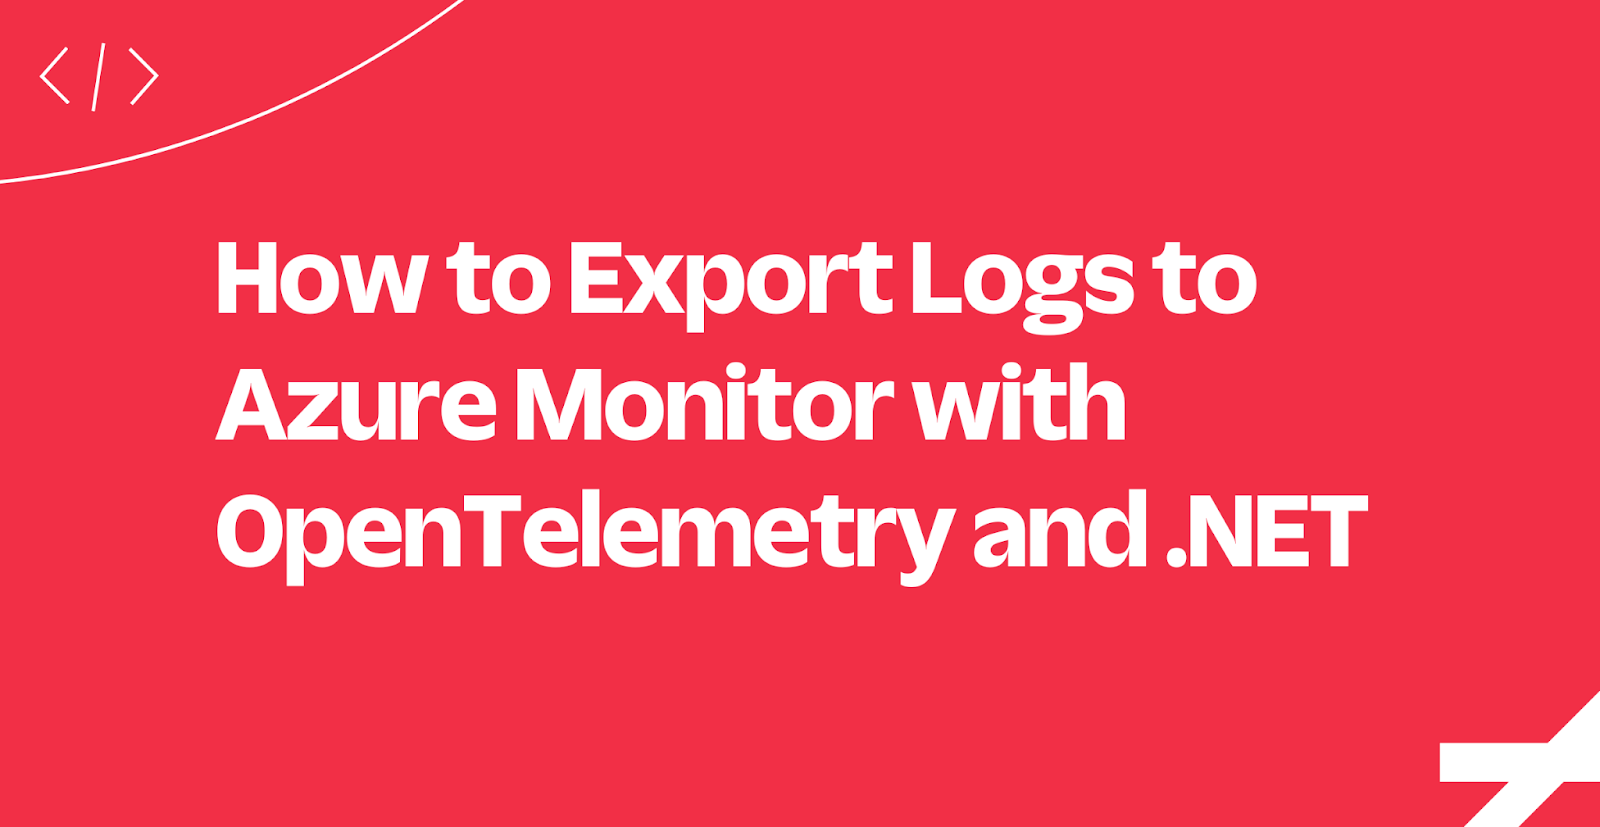 How to Export Logs to Azure Monitor with OpenTelemetry and .NET